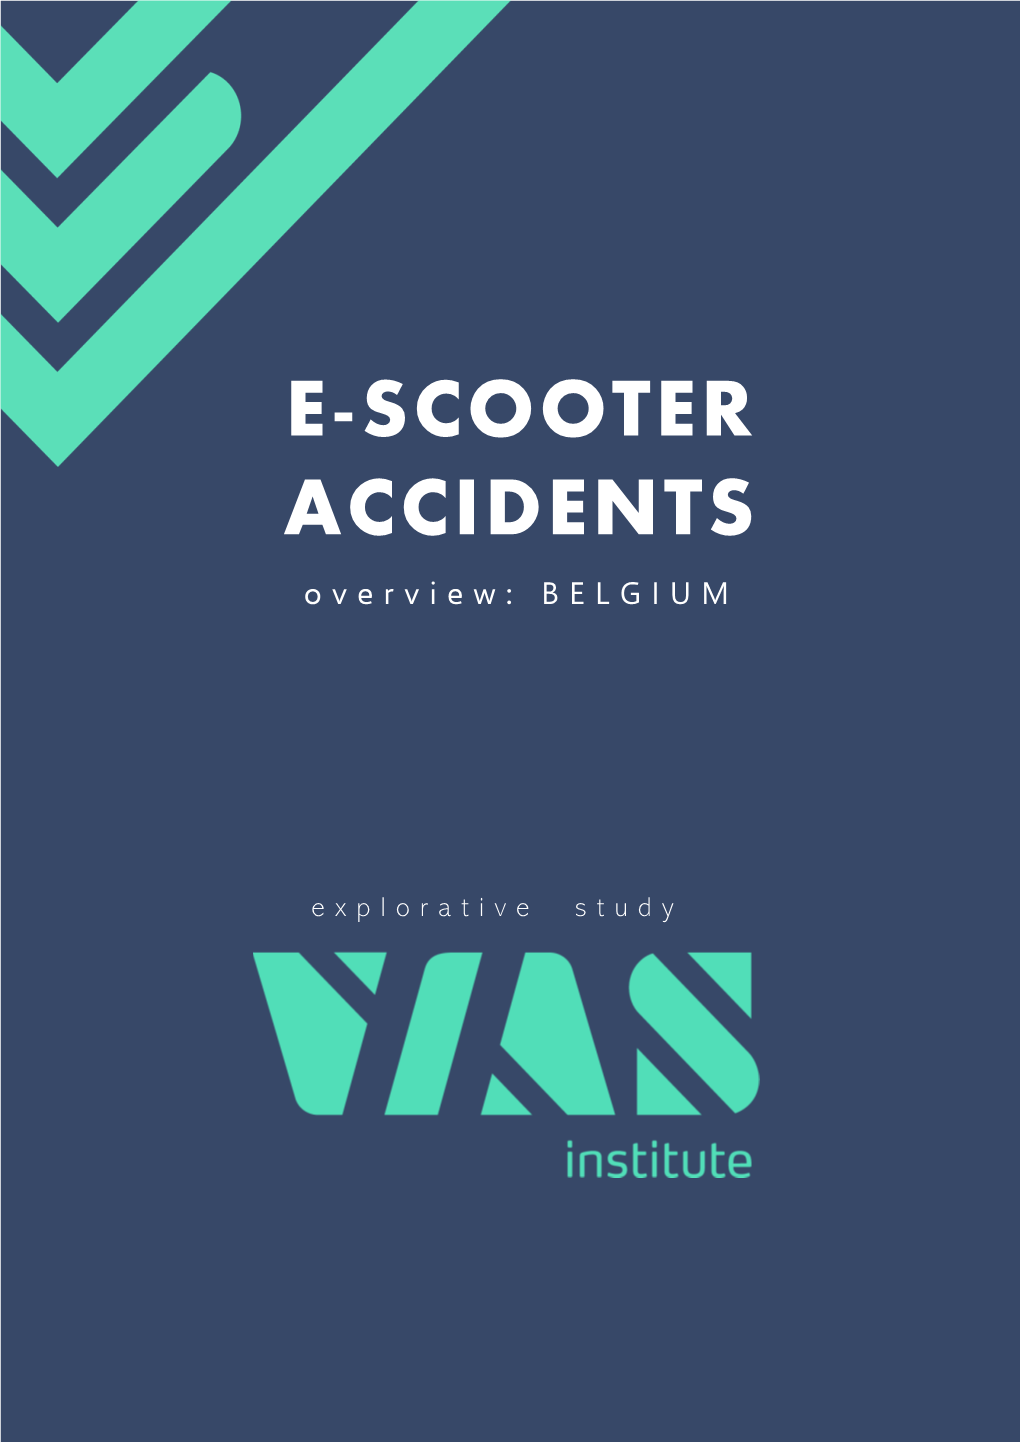 E-SCOOTER ACCIDENTS Overview: BELGIUM